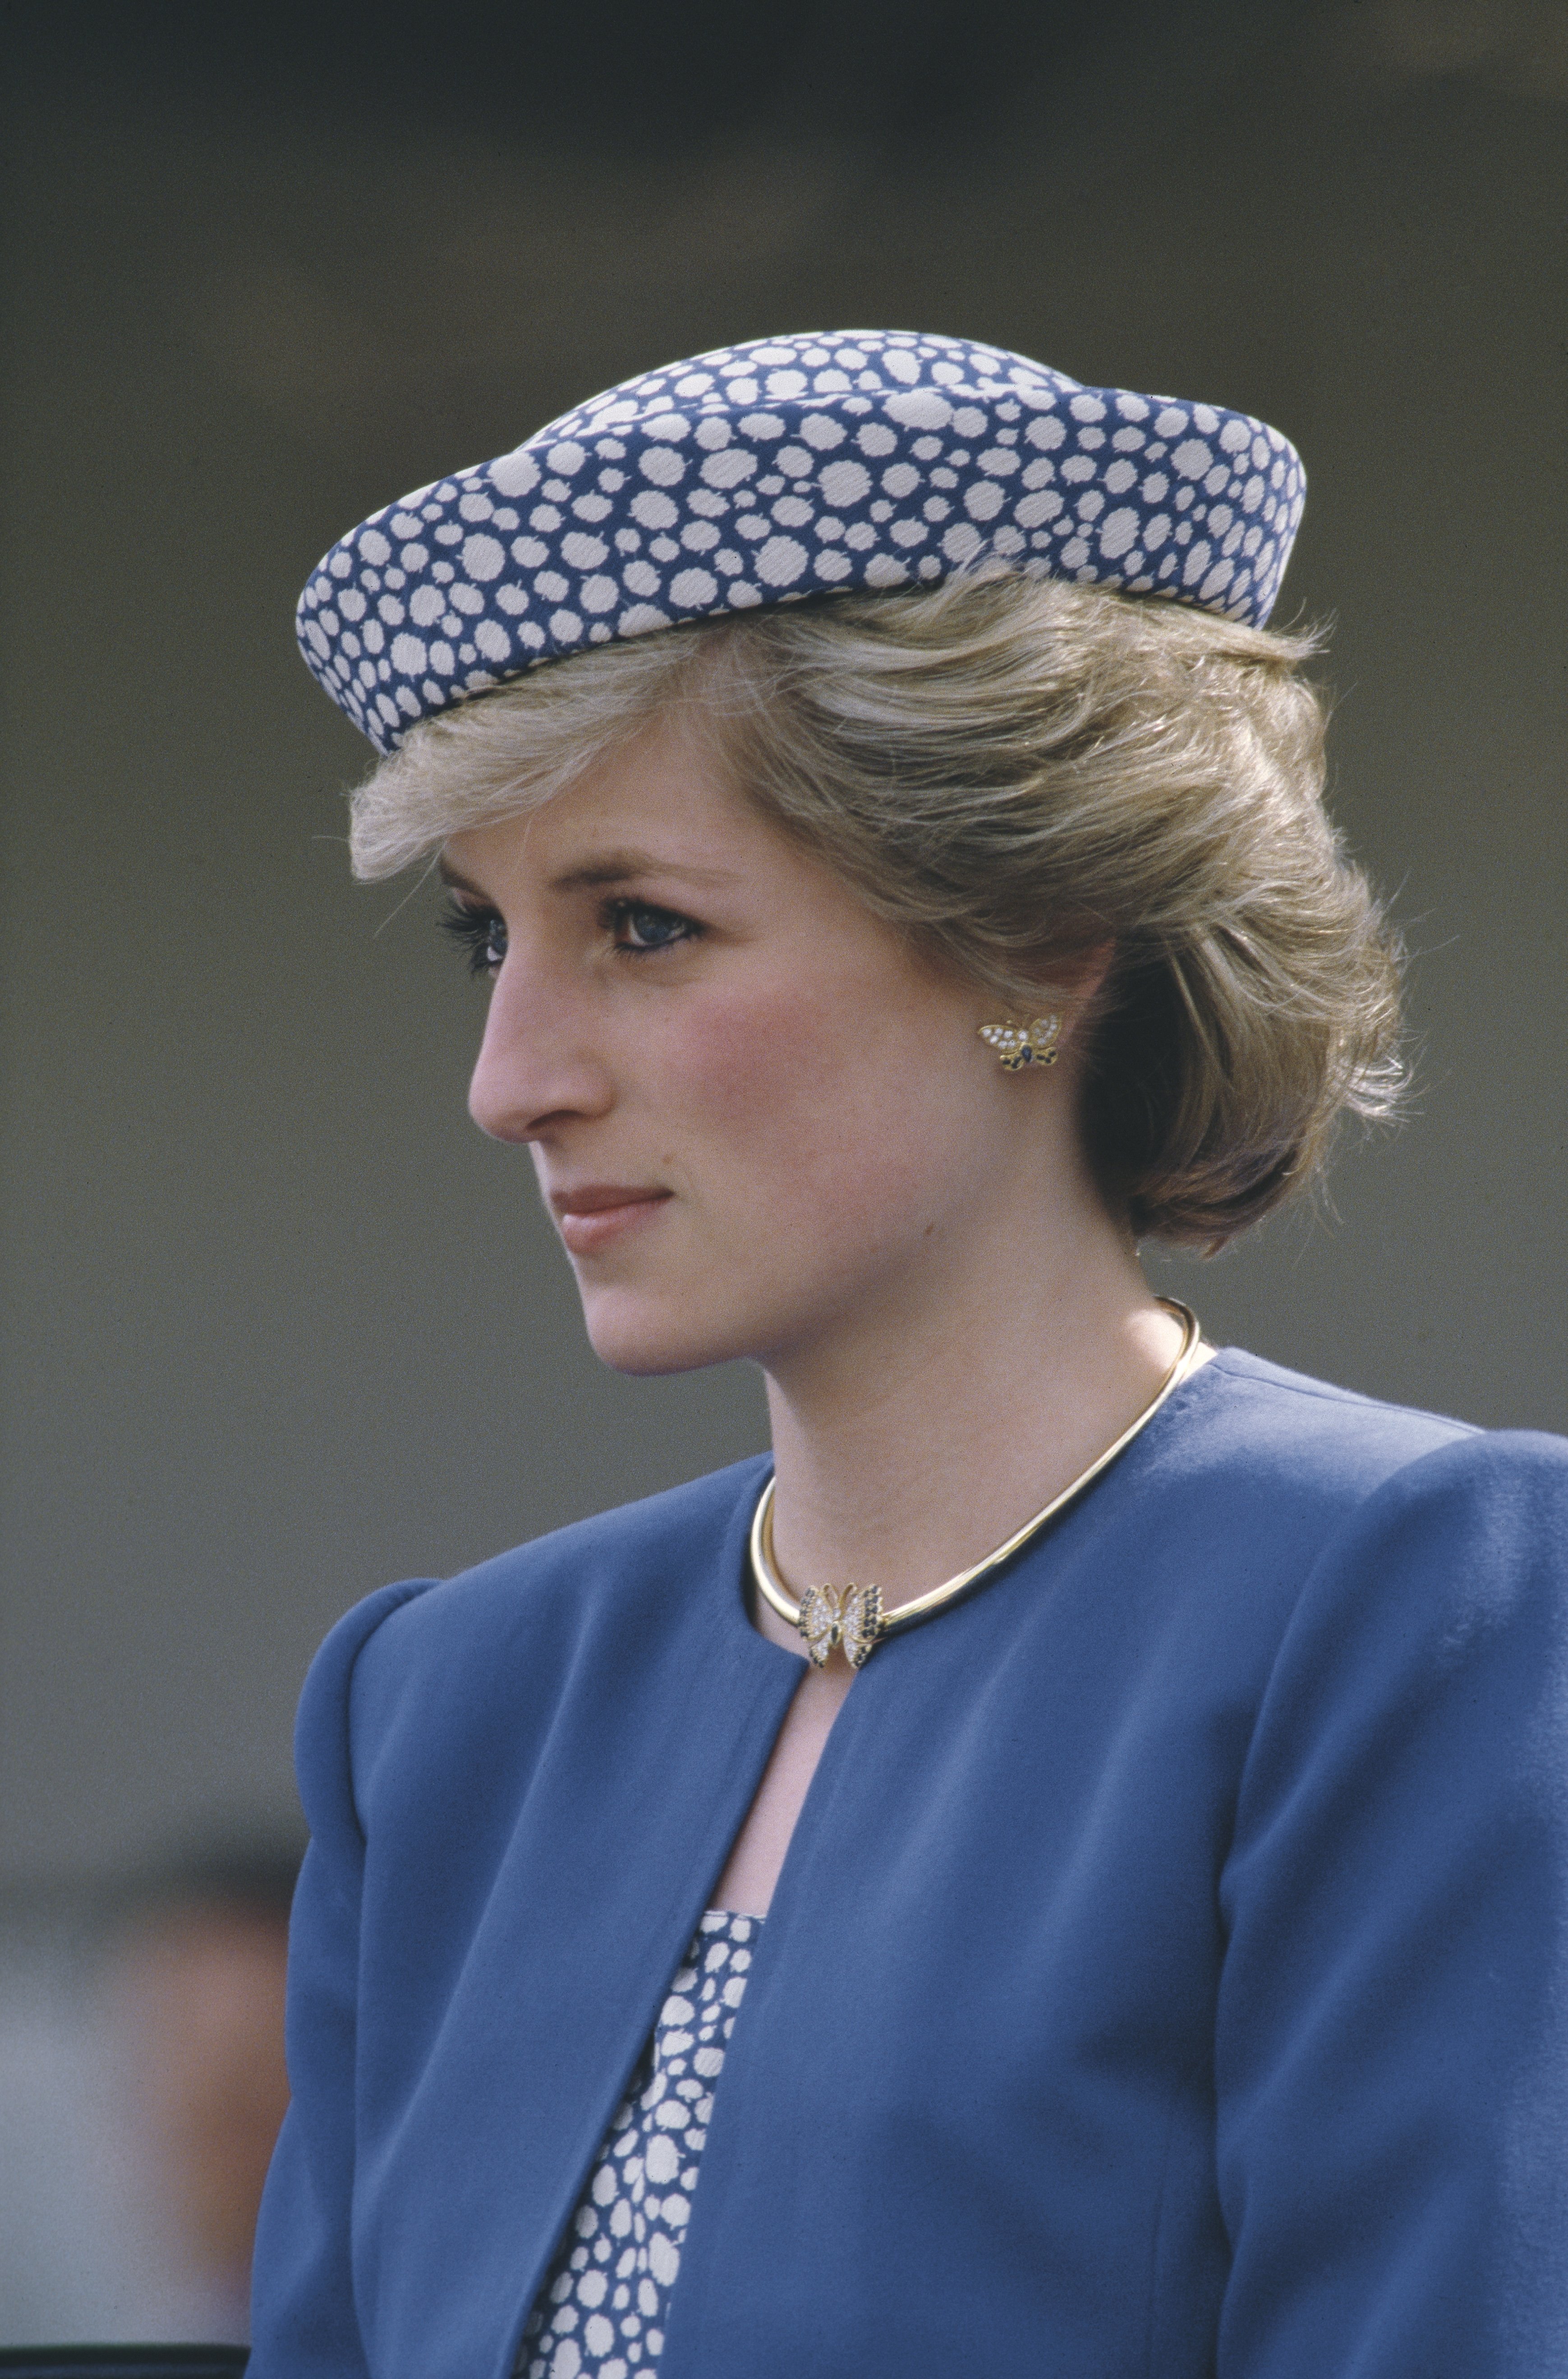 Princess Diana in Canada 1986. | Source: Getty Images